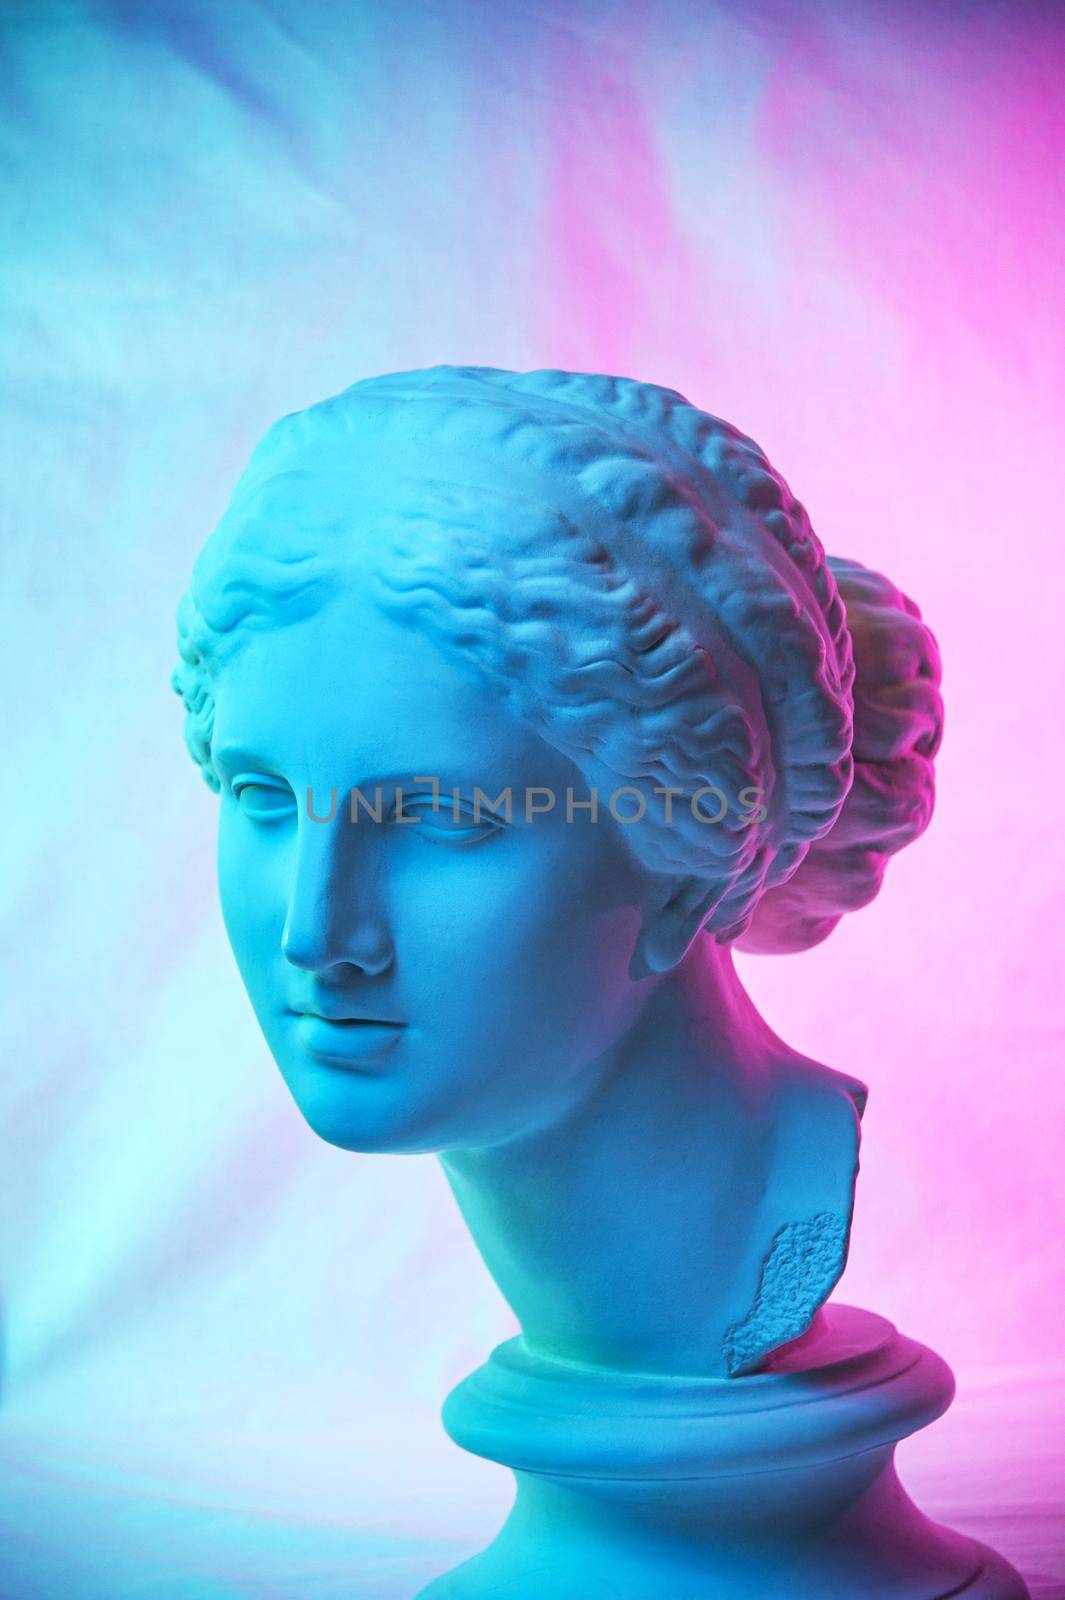 Statue of Venus de Milo. Creative concept colorful neon image with ancient greek sculpture Venus or Aphrodite head. Webpunk, vaporwave and surreal art style. Pink and blue duotone effects. by bashta